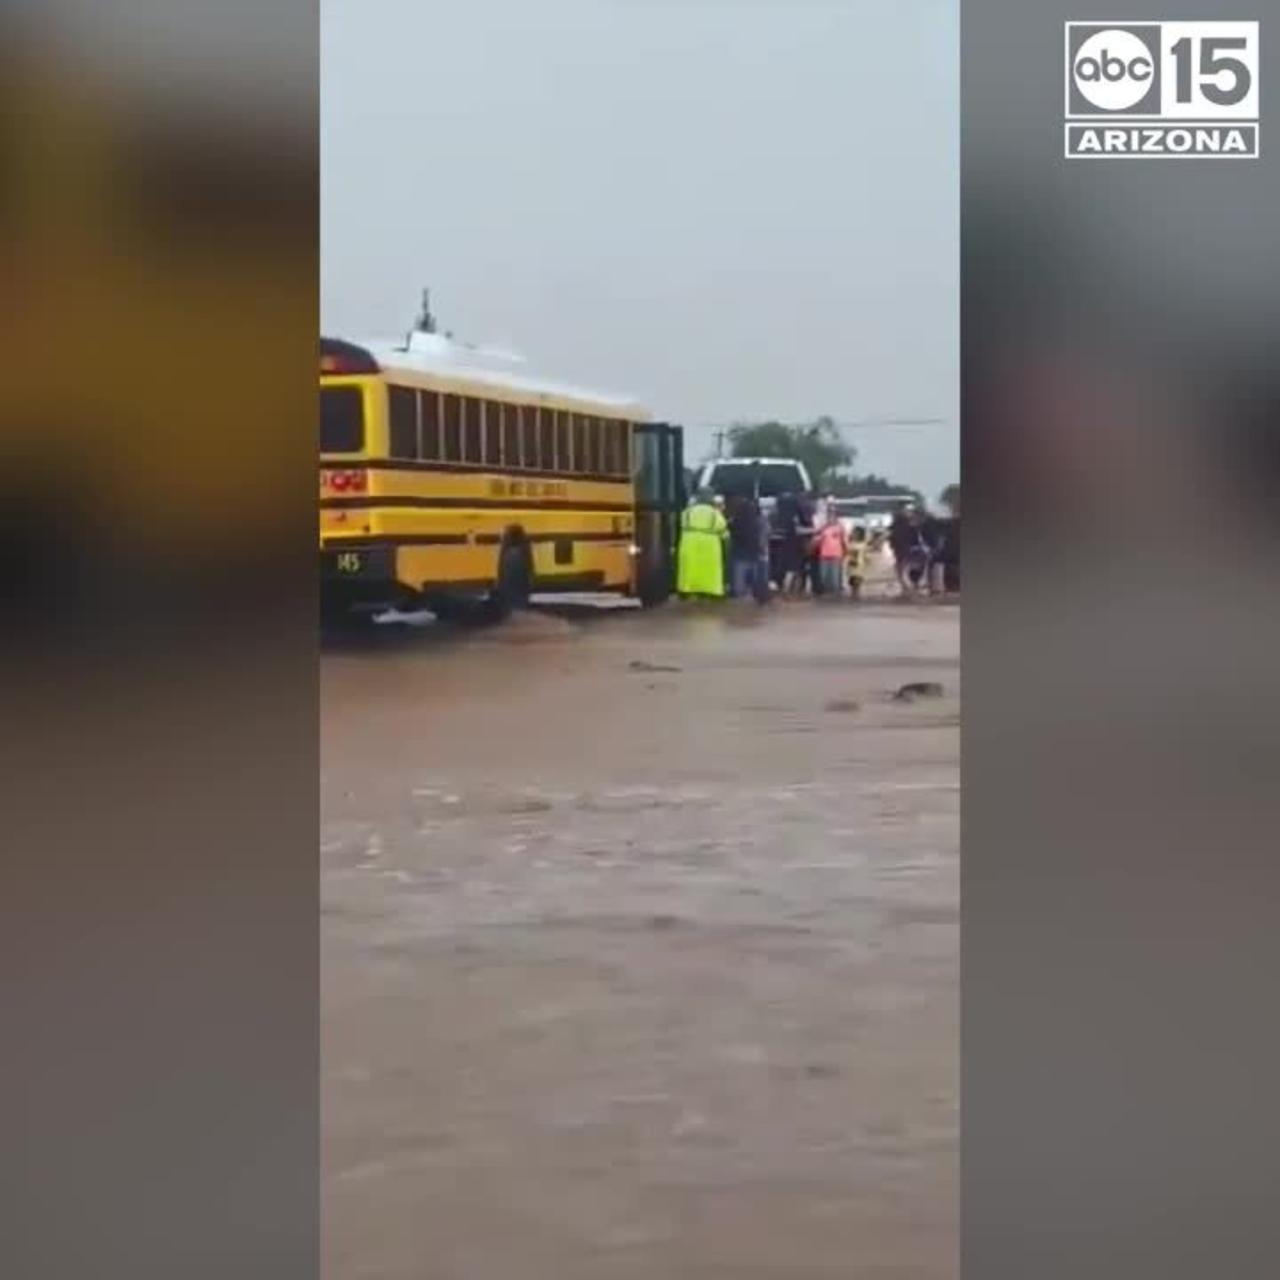 39 students, two drivers rescued from school bus outside Tucson in flood water